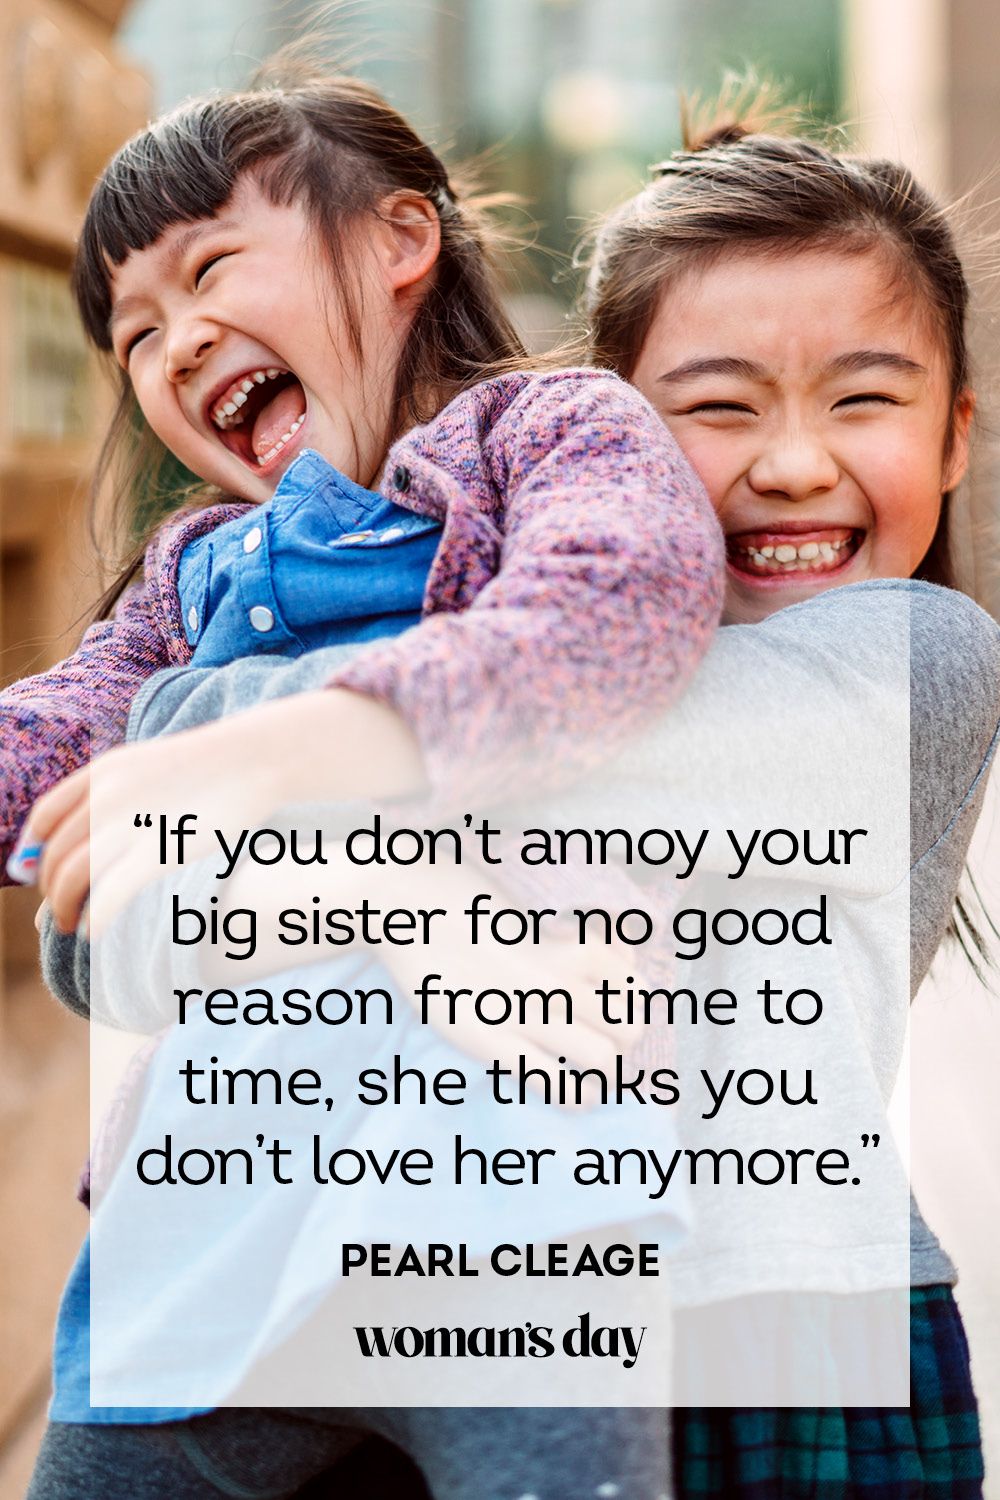 little sister quotes and sayings